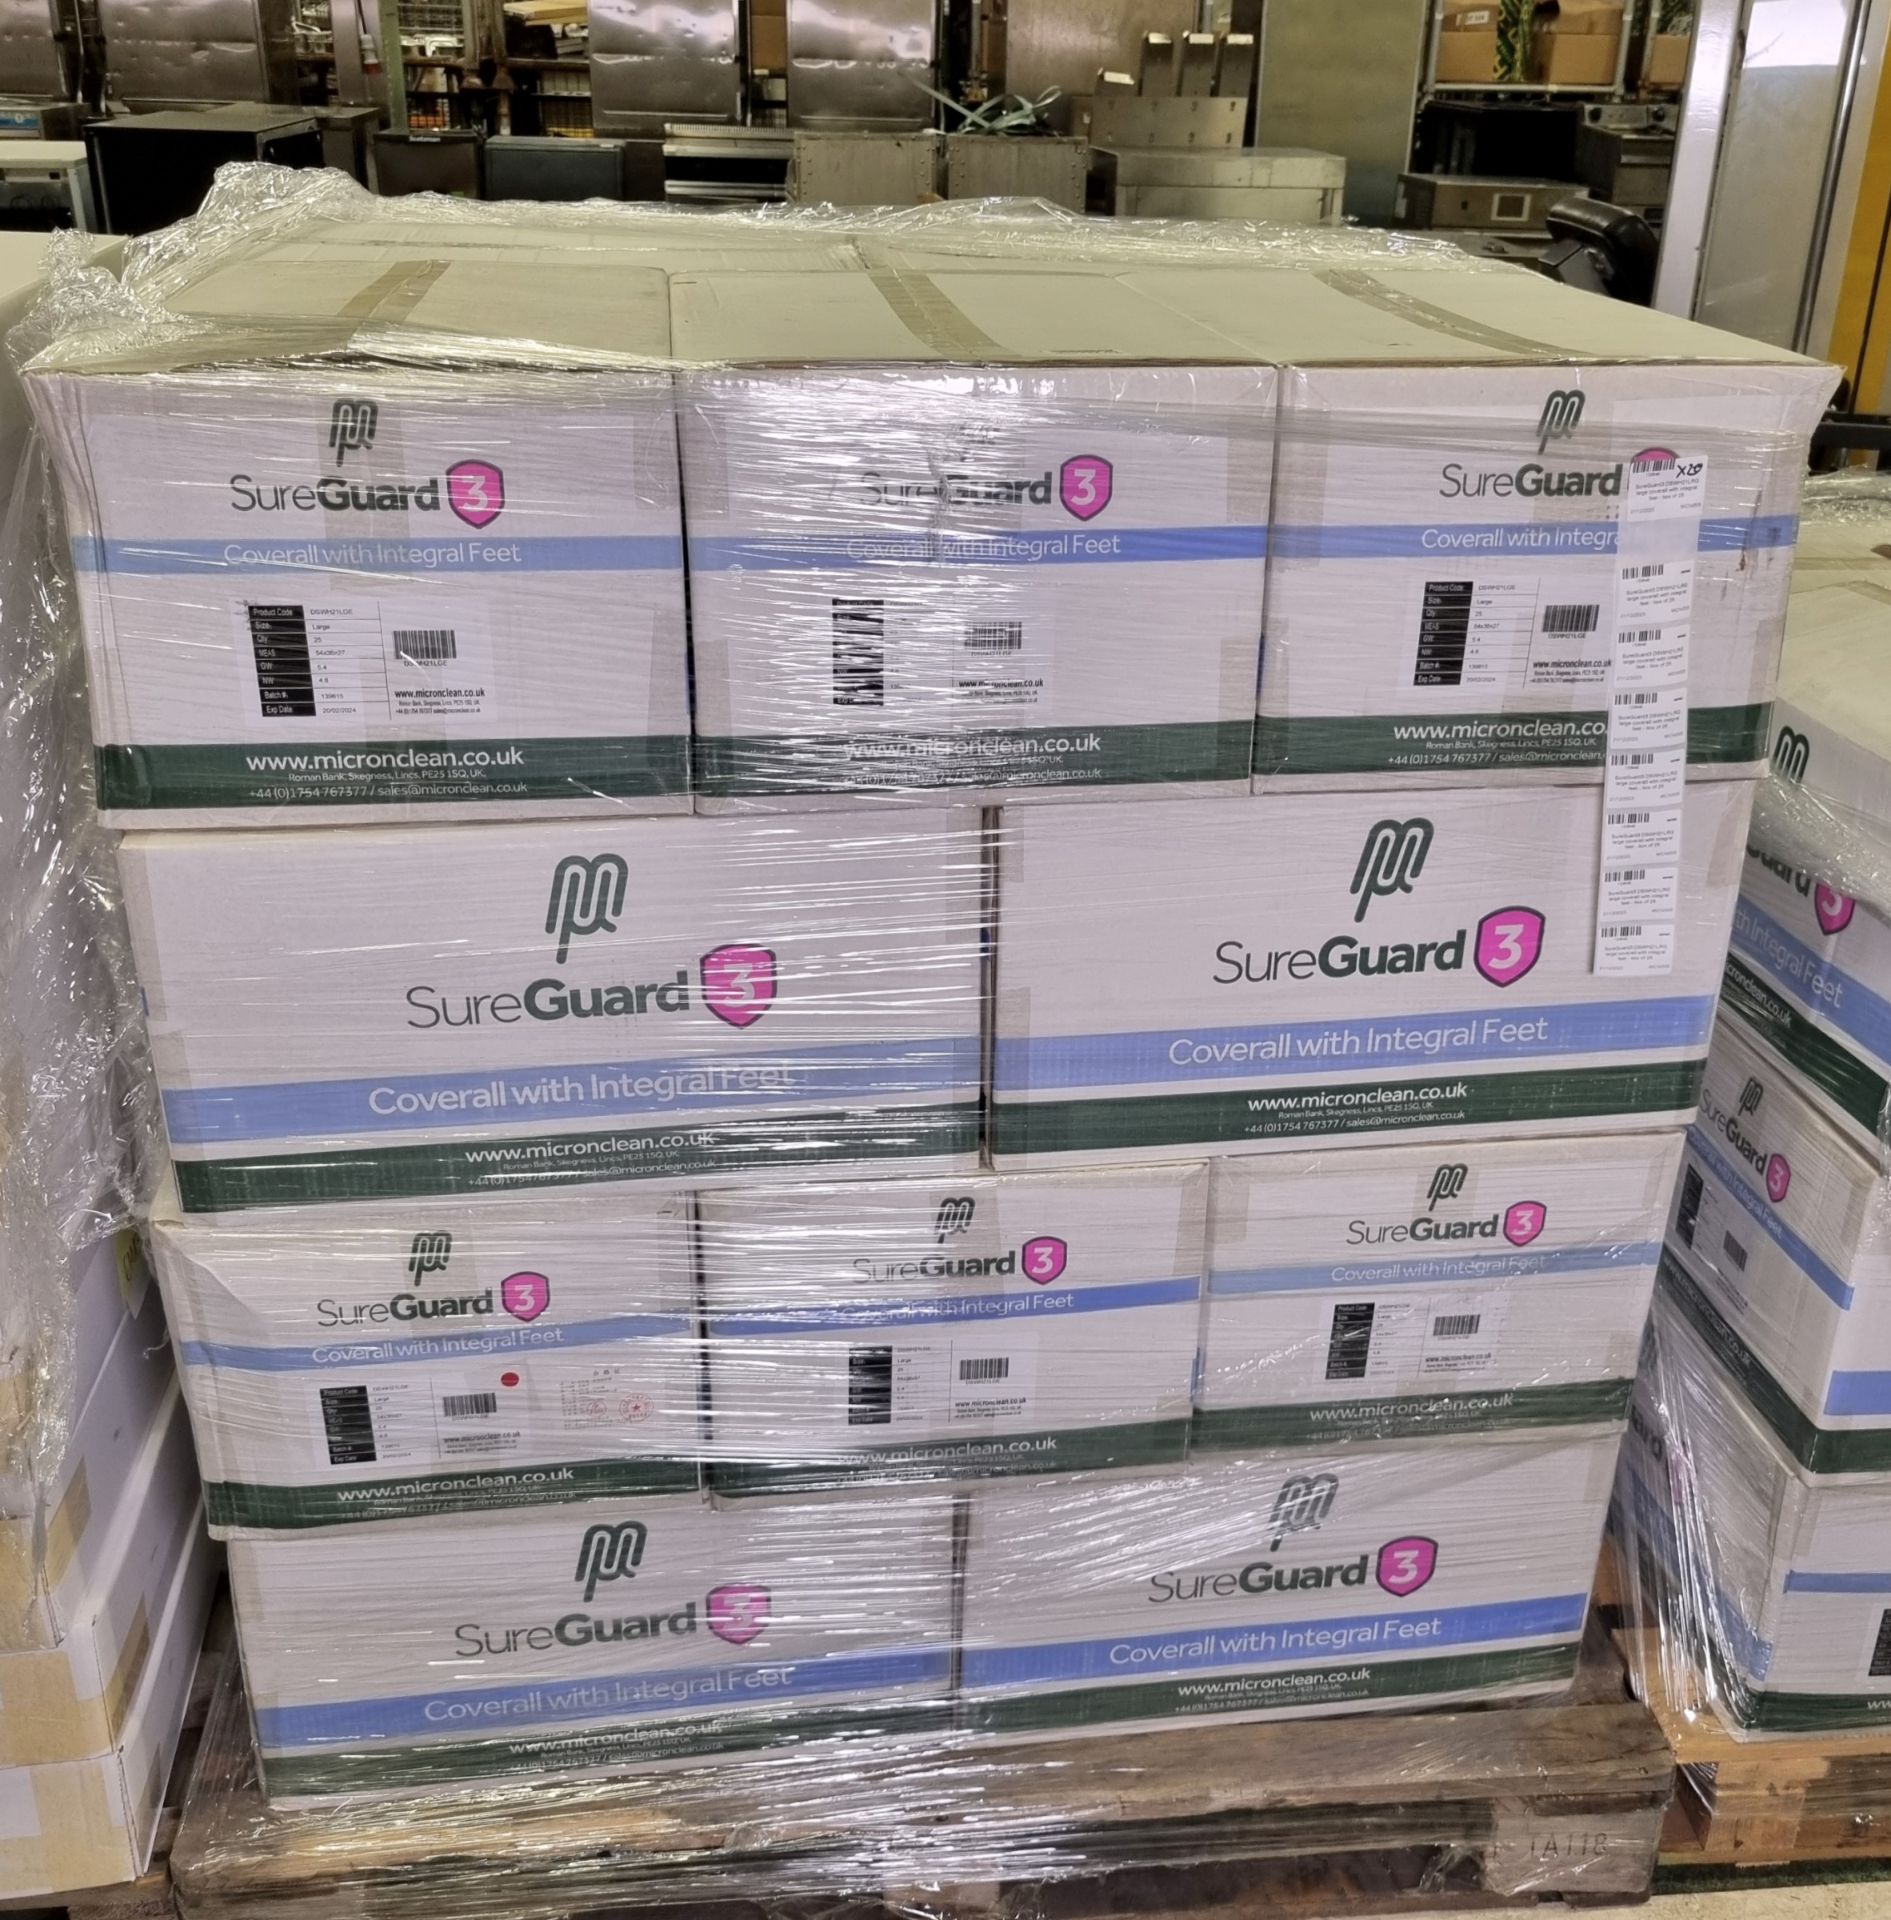 20x boxes of SureGuard3 DSWH21LRG large coverall with integral feet - 25 units per box - Bild 5 aus 5